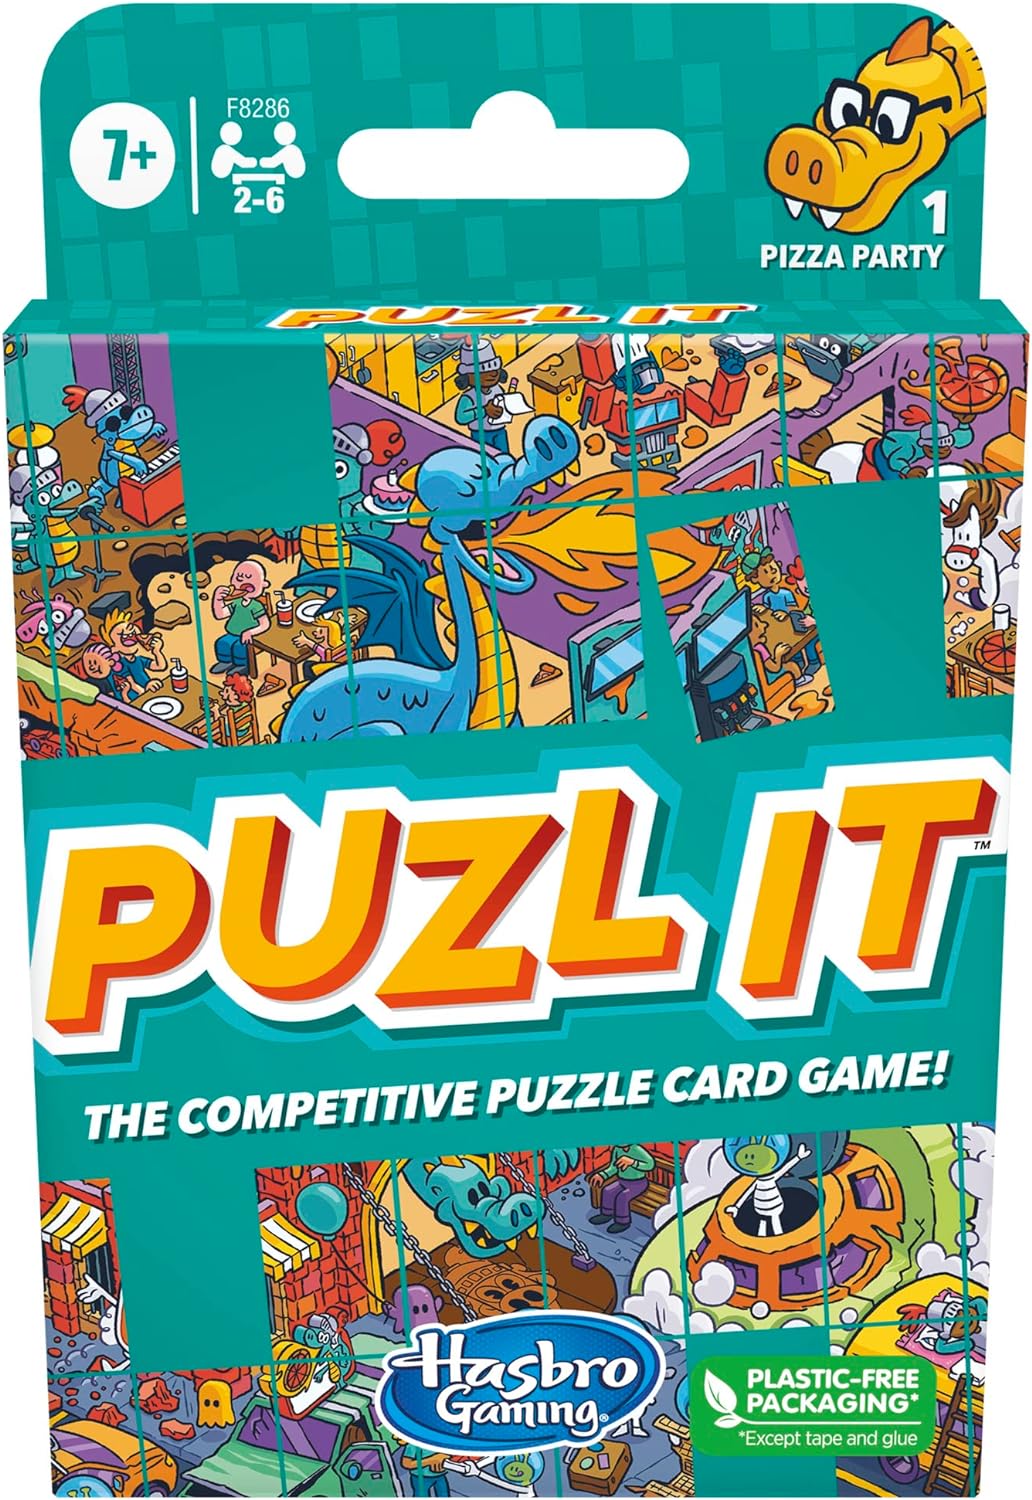 Hasbro Gaming Puzl It Game, Competitive Puzzle Card Game for Ages 7 and Up, Kids Game, Family Game for 2 to 6 Players, Pizza Party Theme, Puzzle Games $4.5